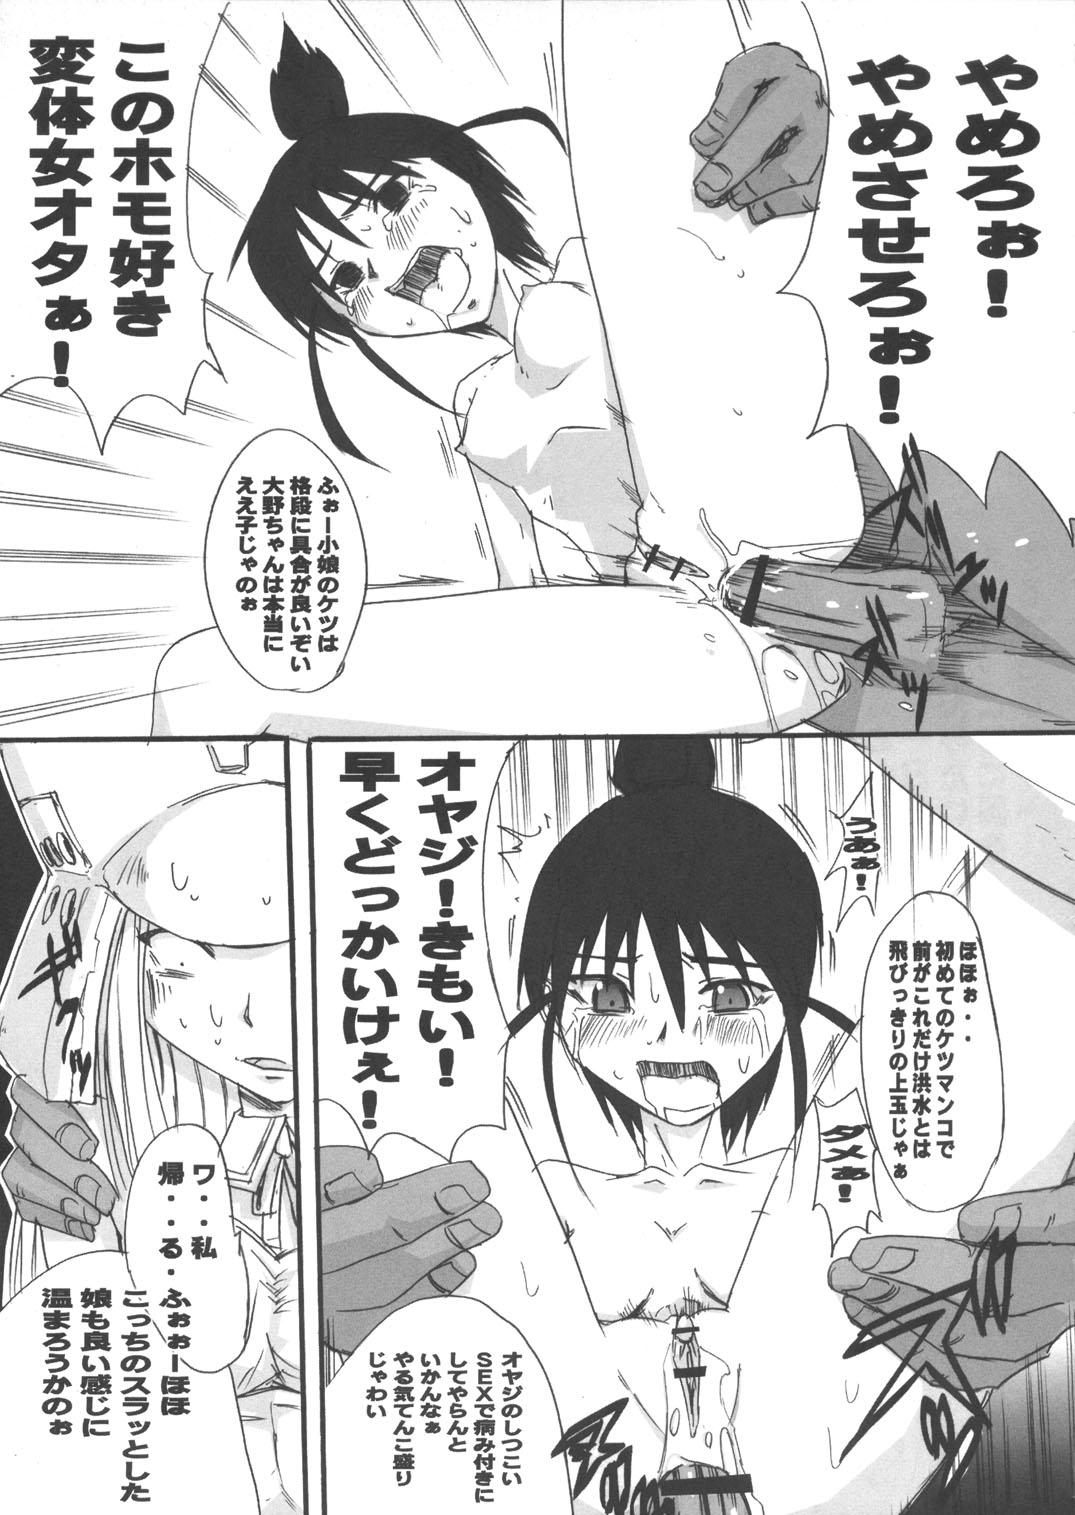 Licking Genshikeso - Genshiken Doggy Style Porn - Page 4